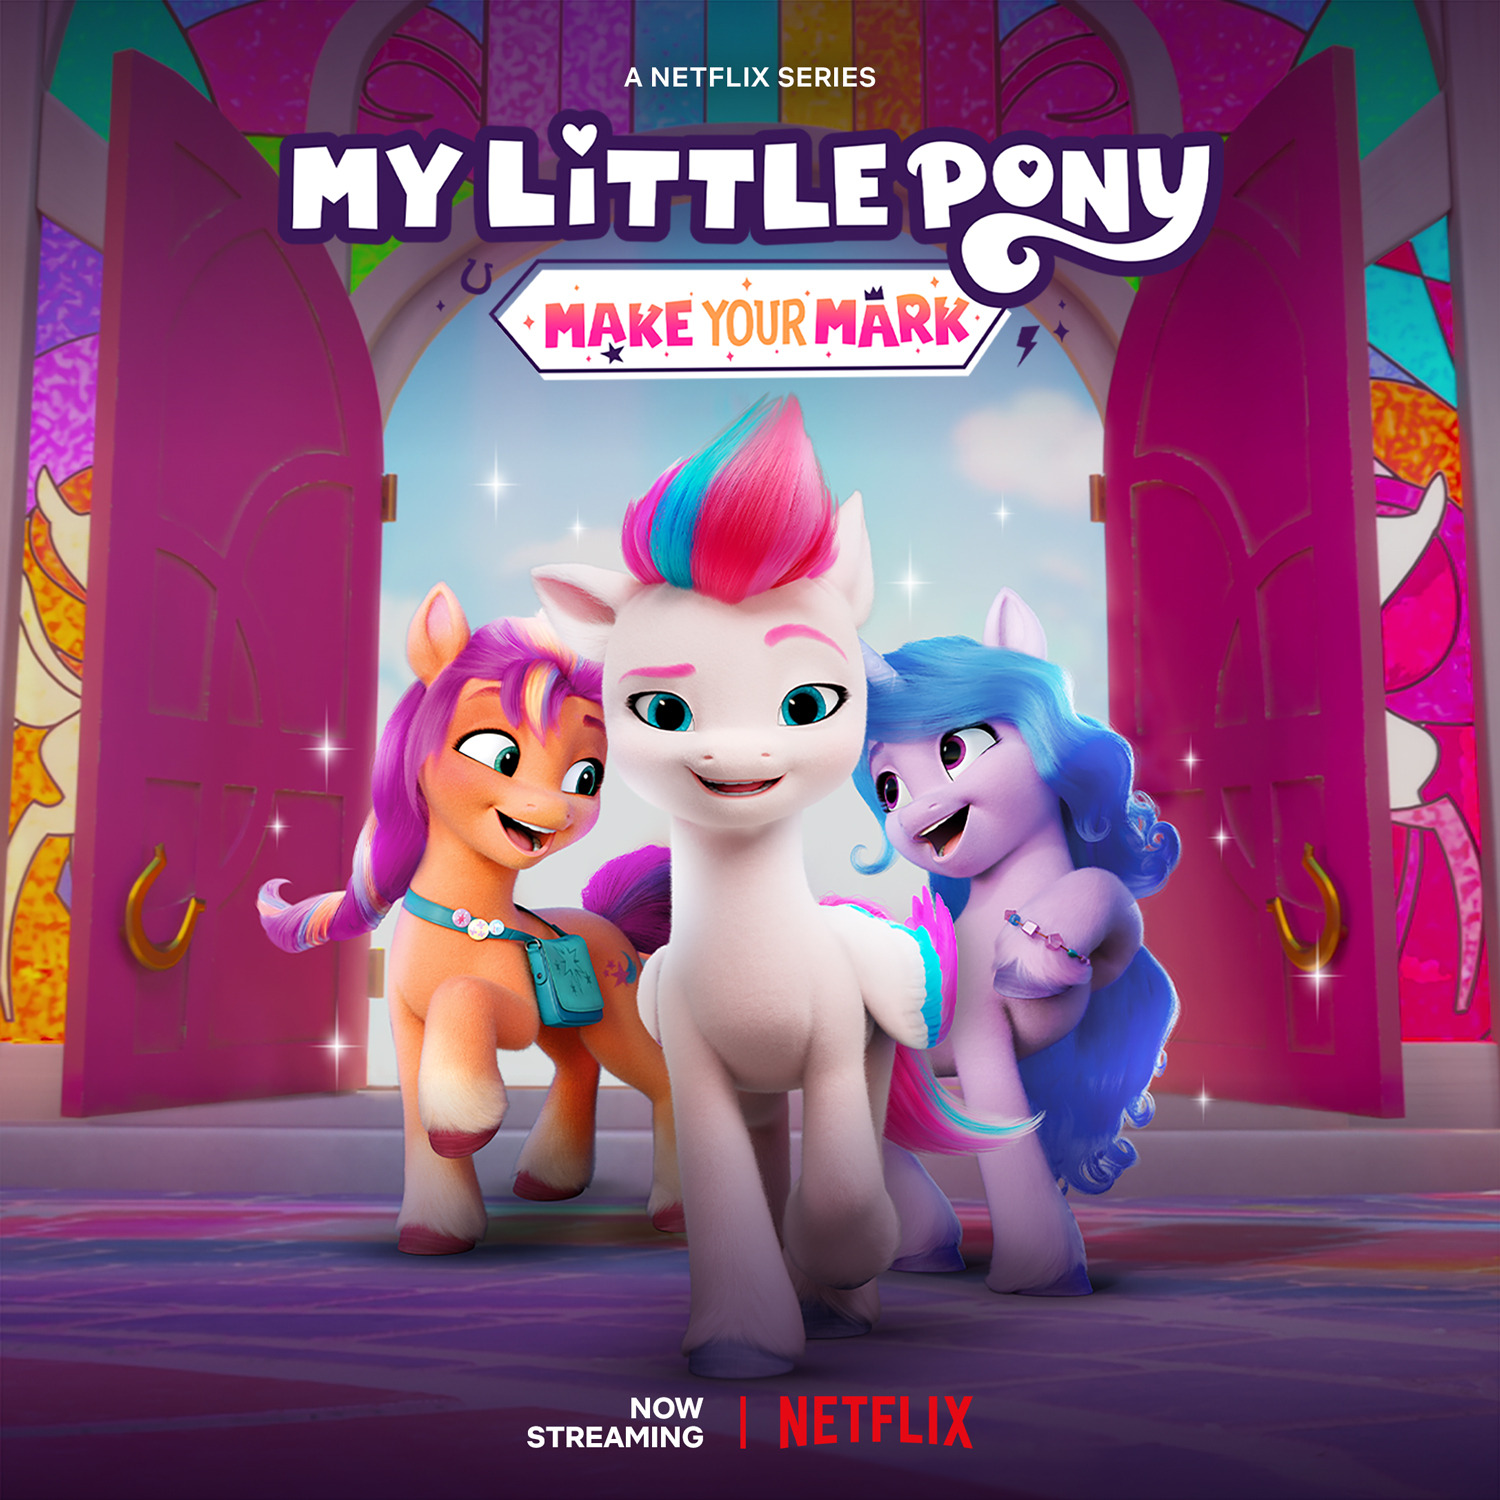 Extra Large TV Poster Image for My Little Pony: Make Your Mark 